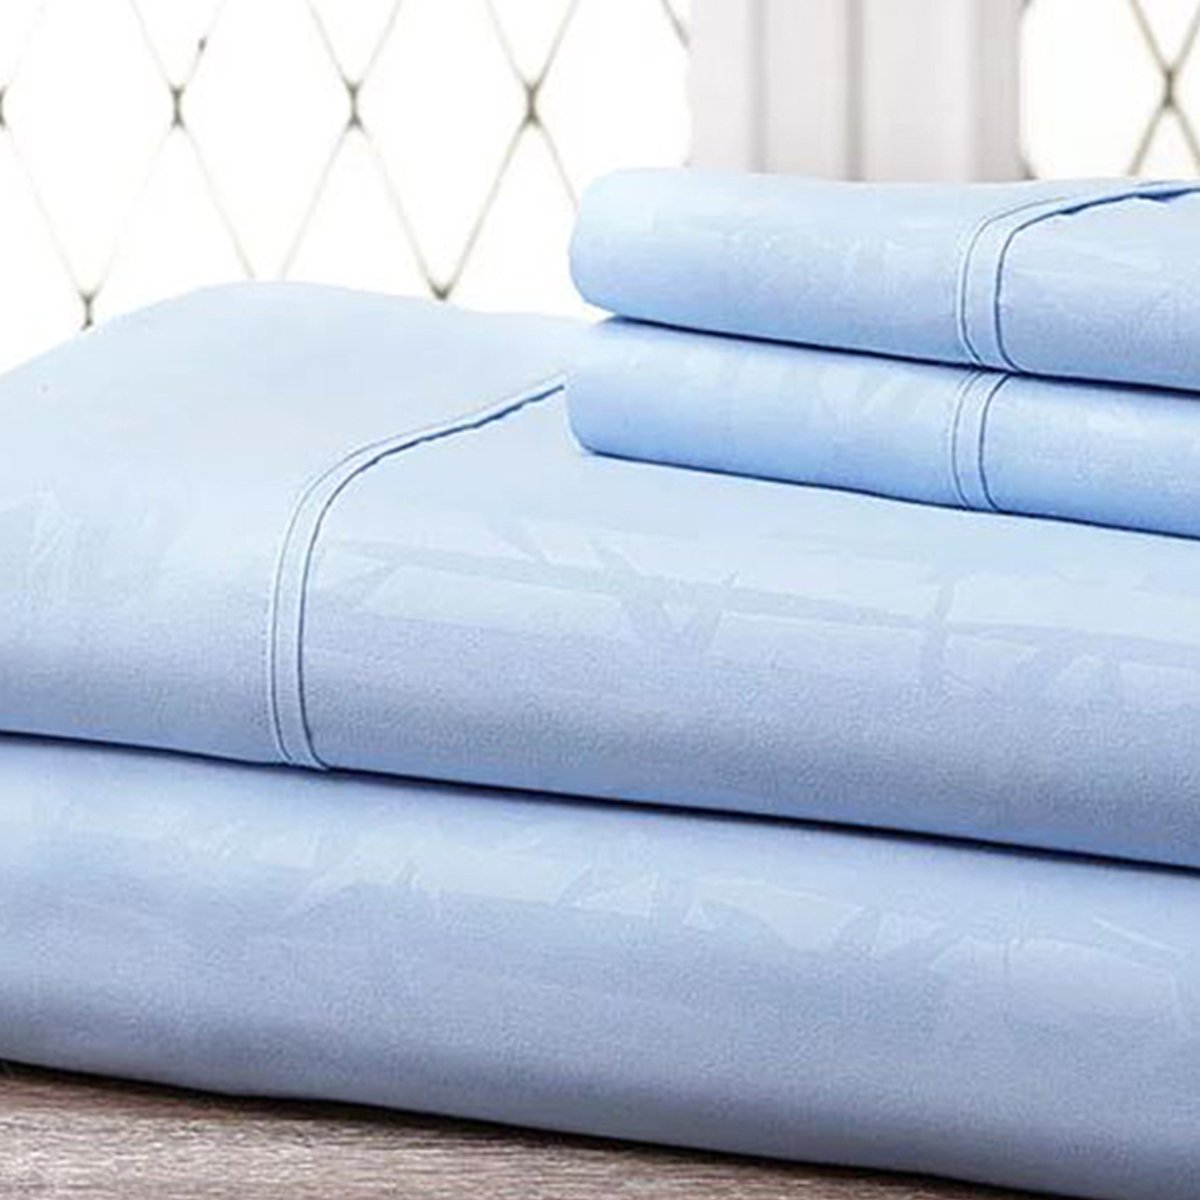 Hny-4pc-eb-lblu-f Super-soft 1600 Series Bamboo Embossed Bed Sheet, Light Blue - Full, 4 Piece